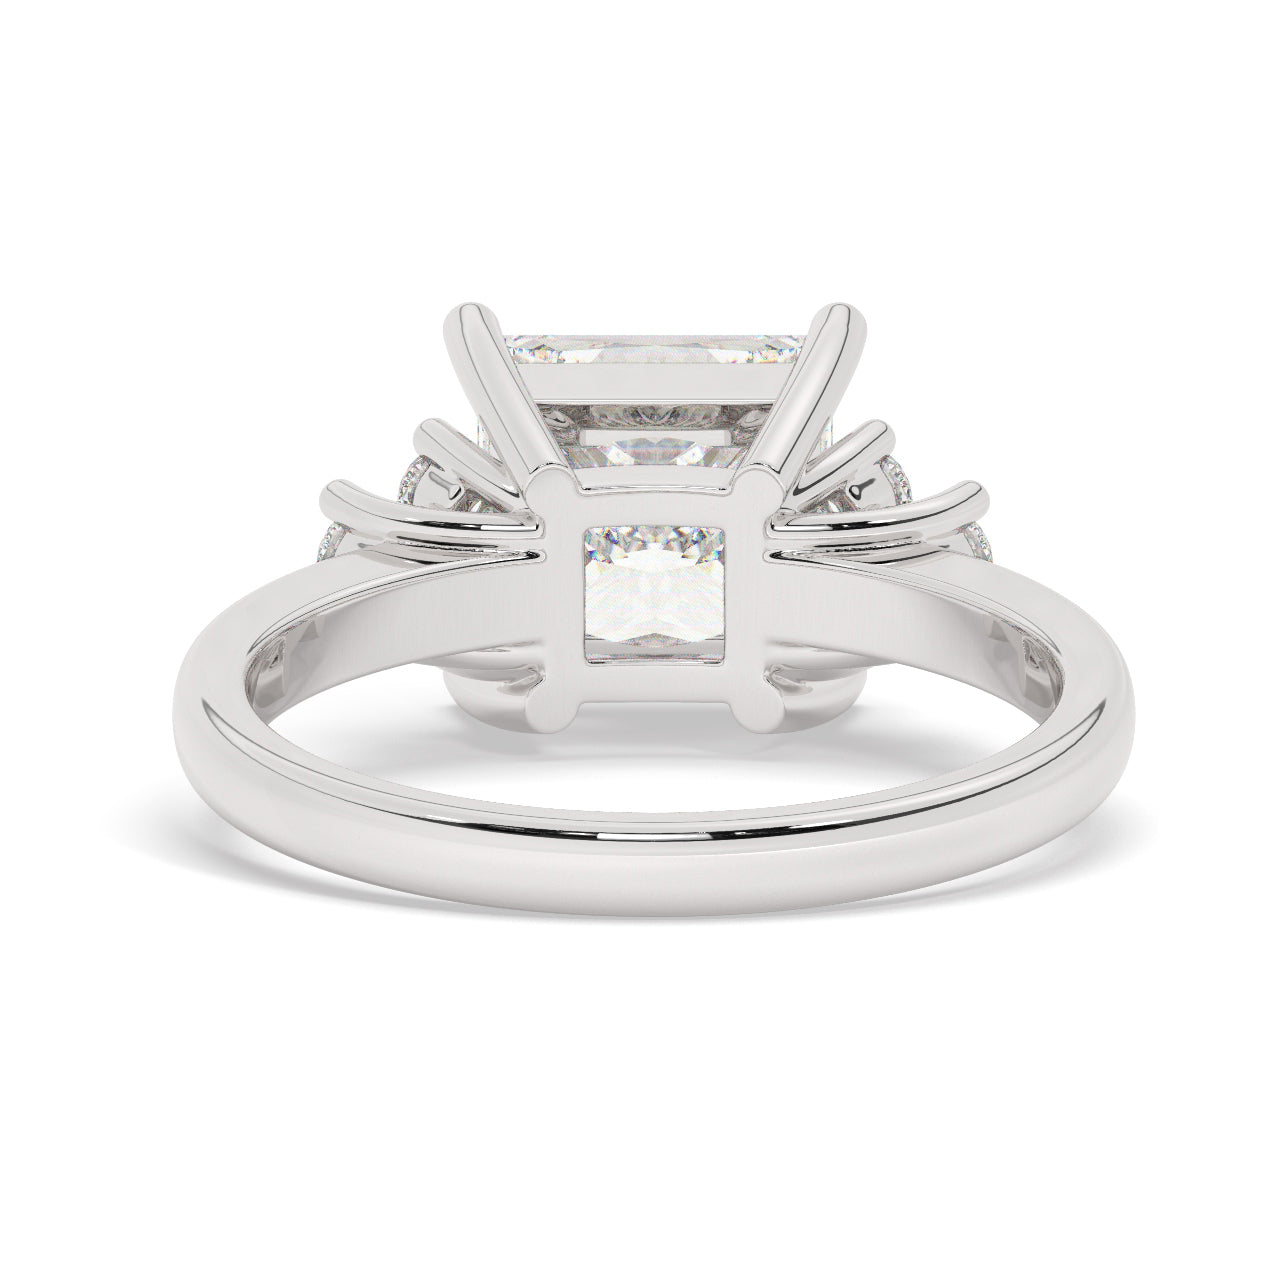 White Gold Princess Cut Engagement Ring Accompanied by Round Stones - Back View